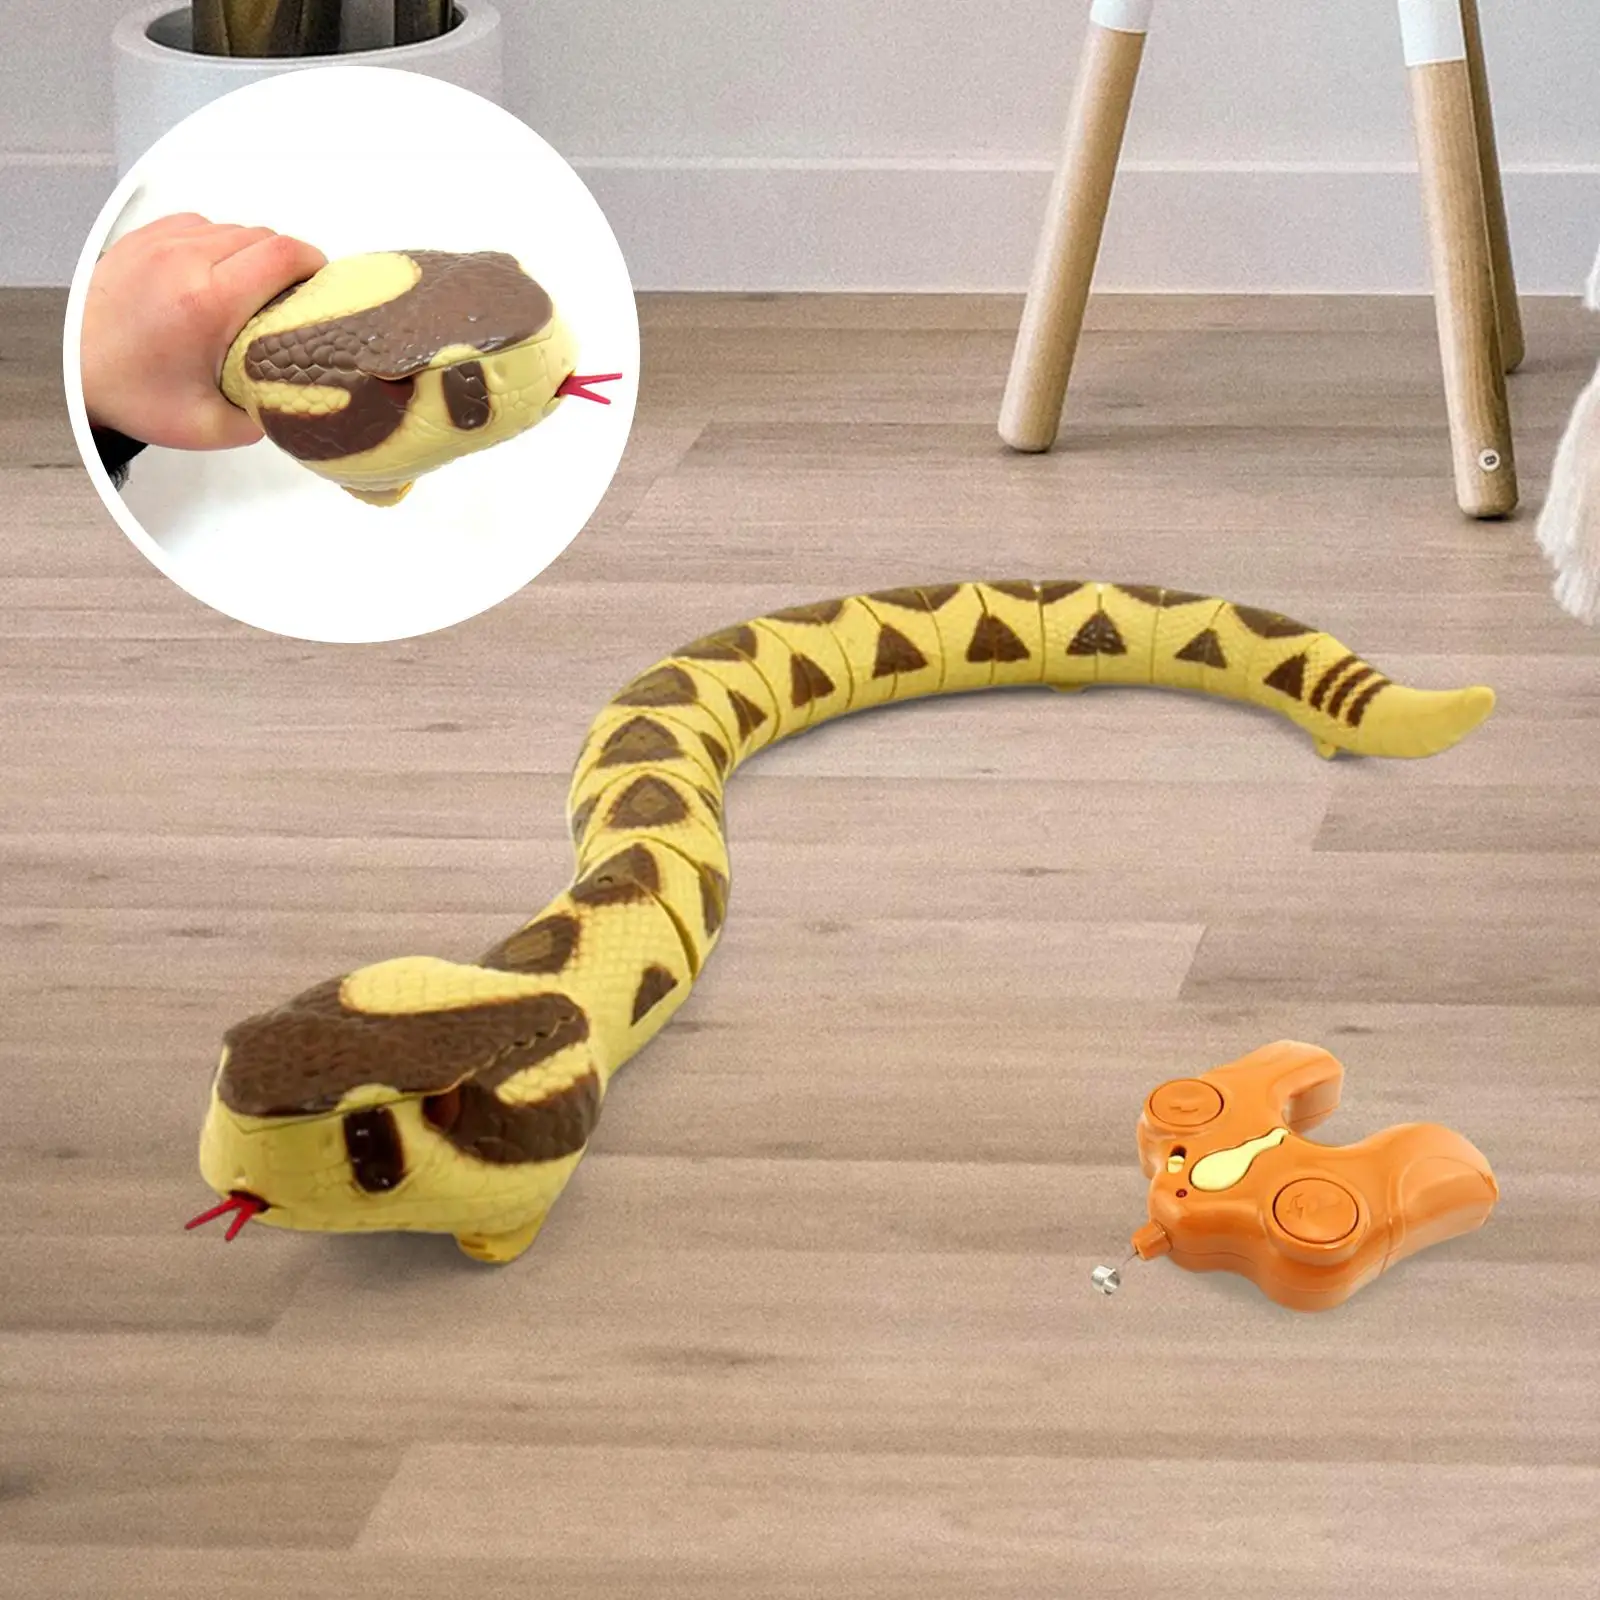 Realistic RC Snake Toys Halloween Tricks Toy Artifical Snake Model for Party